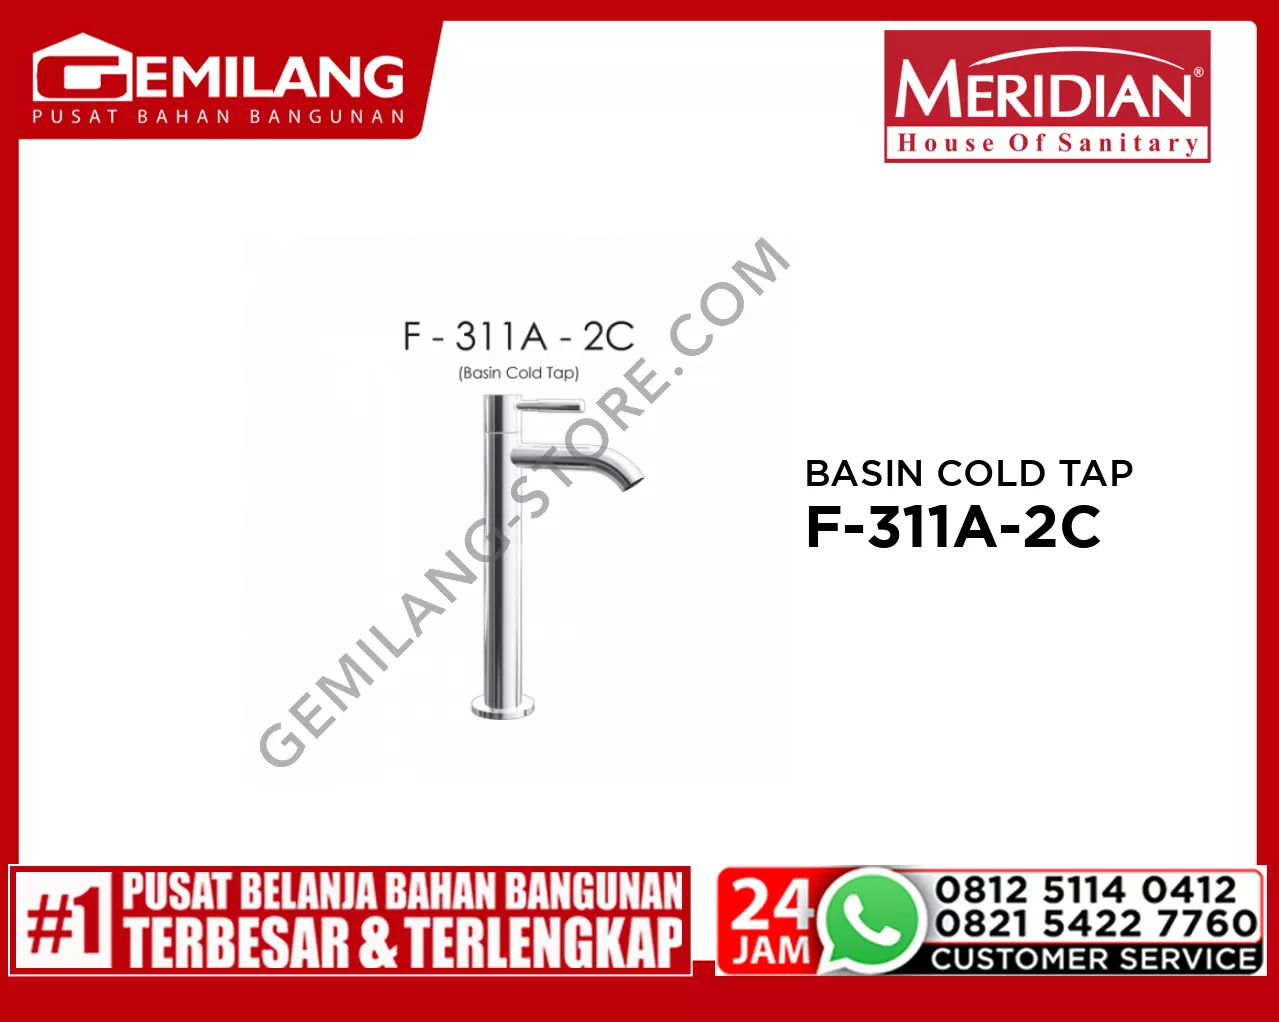 MERIDIAN BASIN COLD TAP F-311A-2C